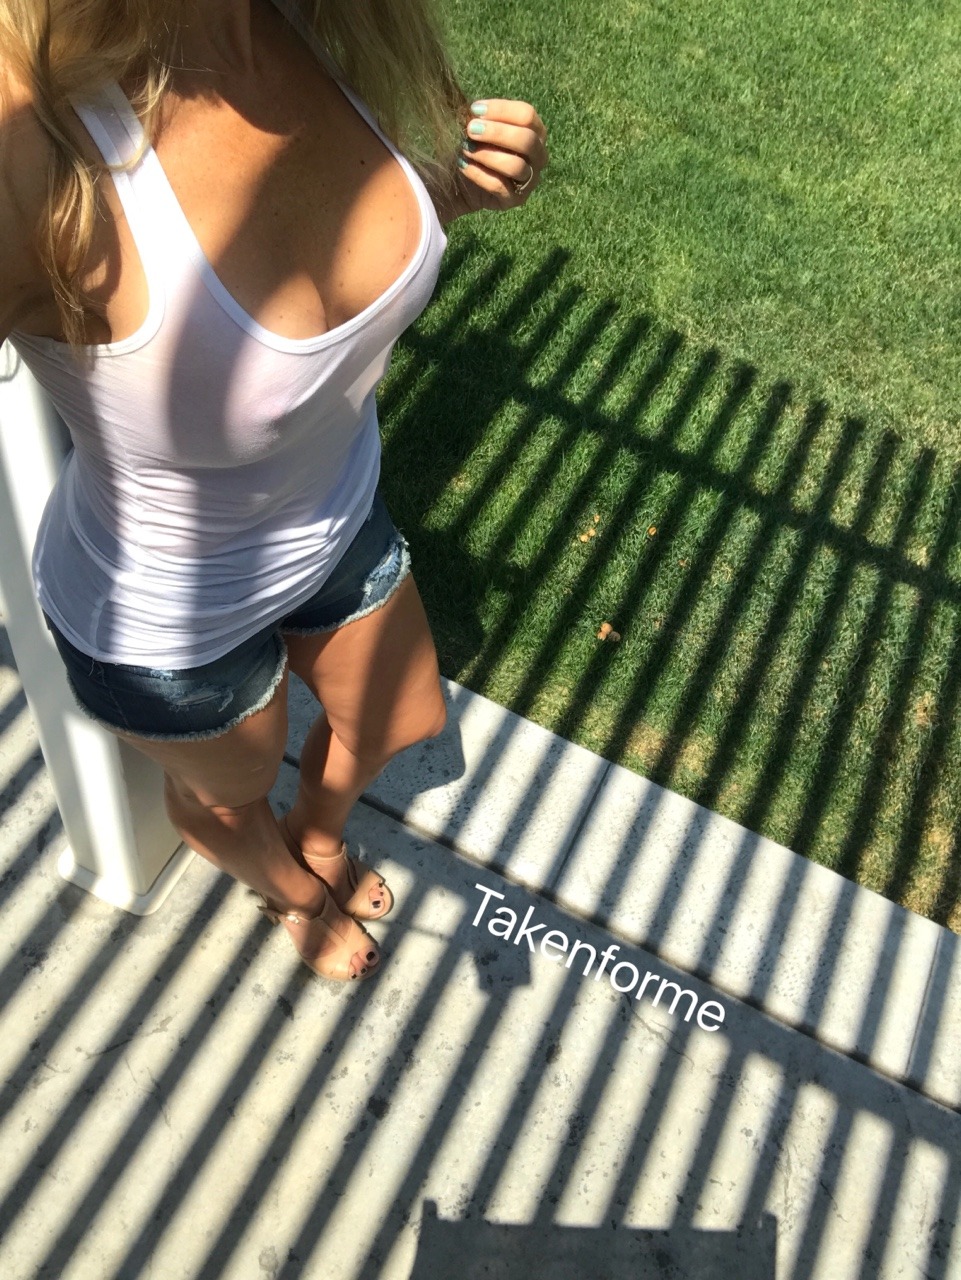 taken-for-me:  The hot summer day and my hard nipples led me to getting wet for you